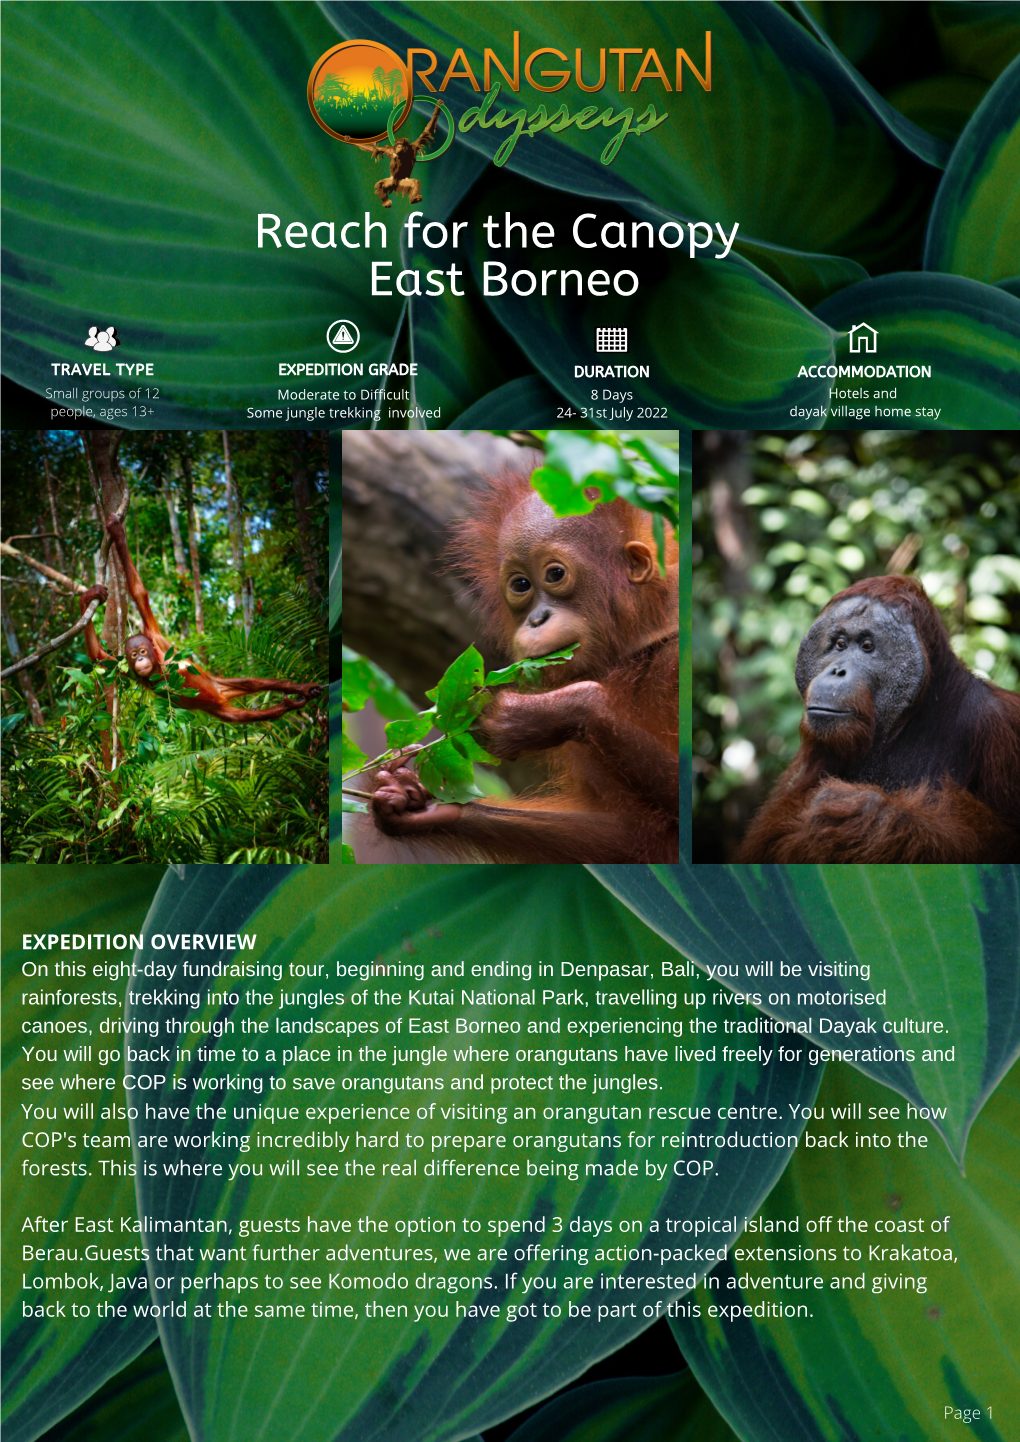 Priced Reach for the Canopy East Borneo Brochure